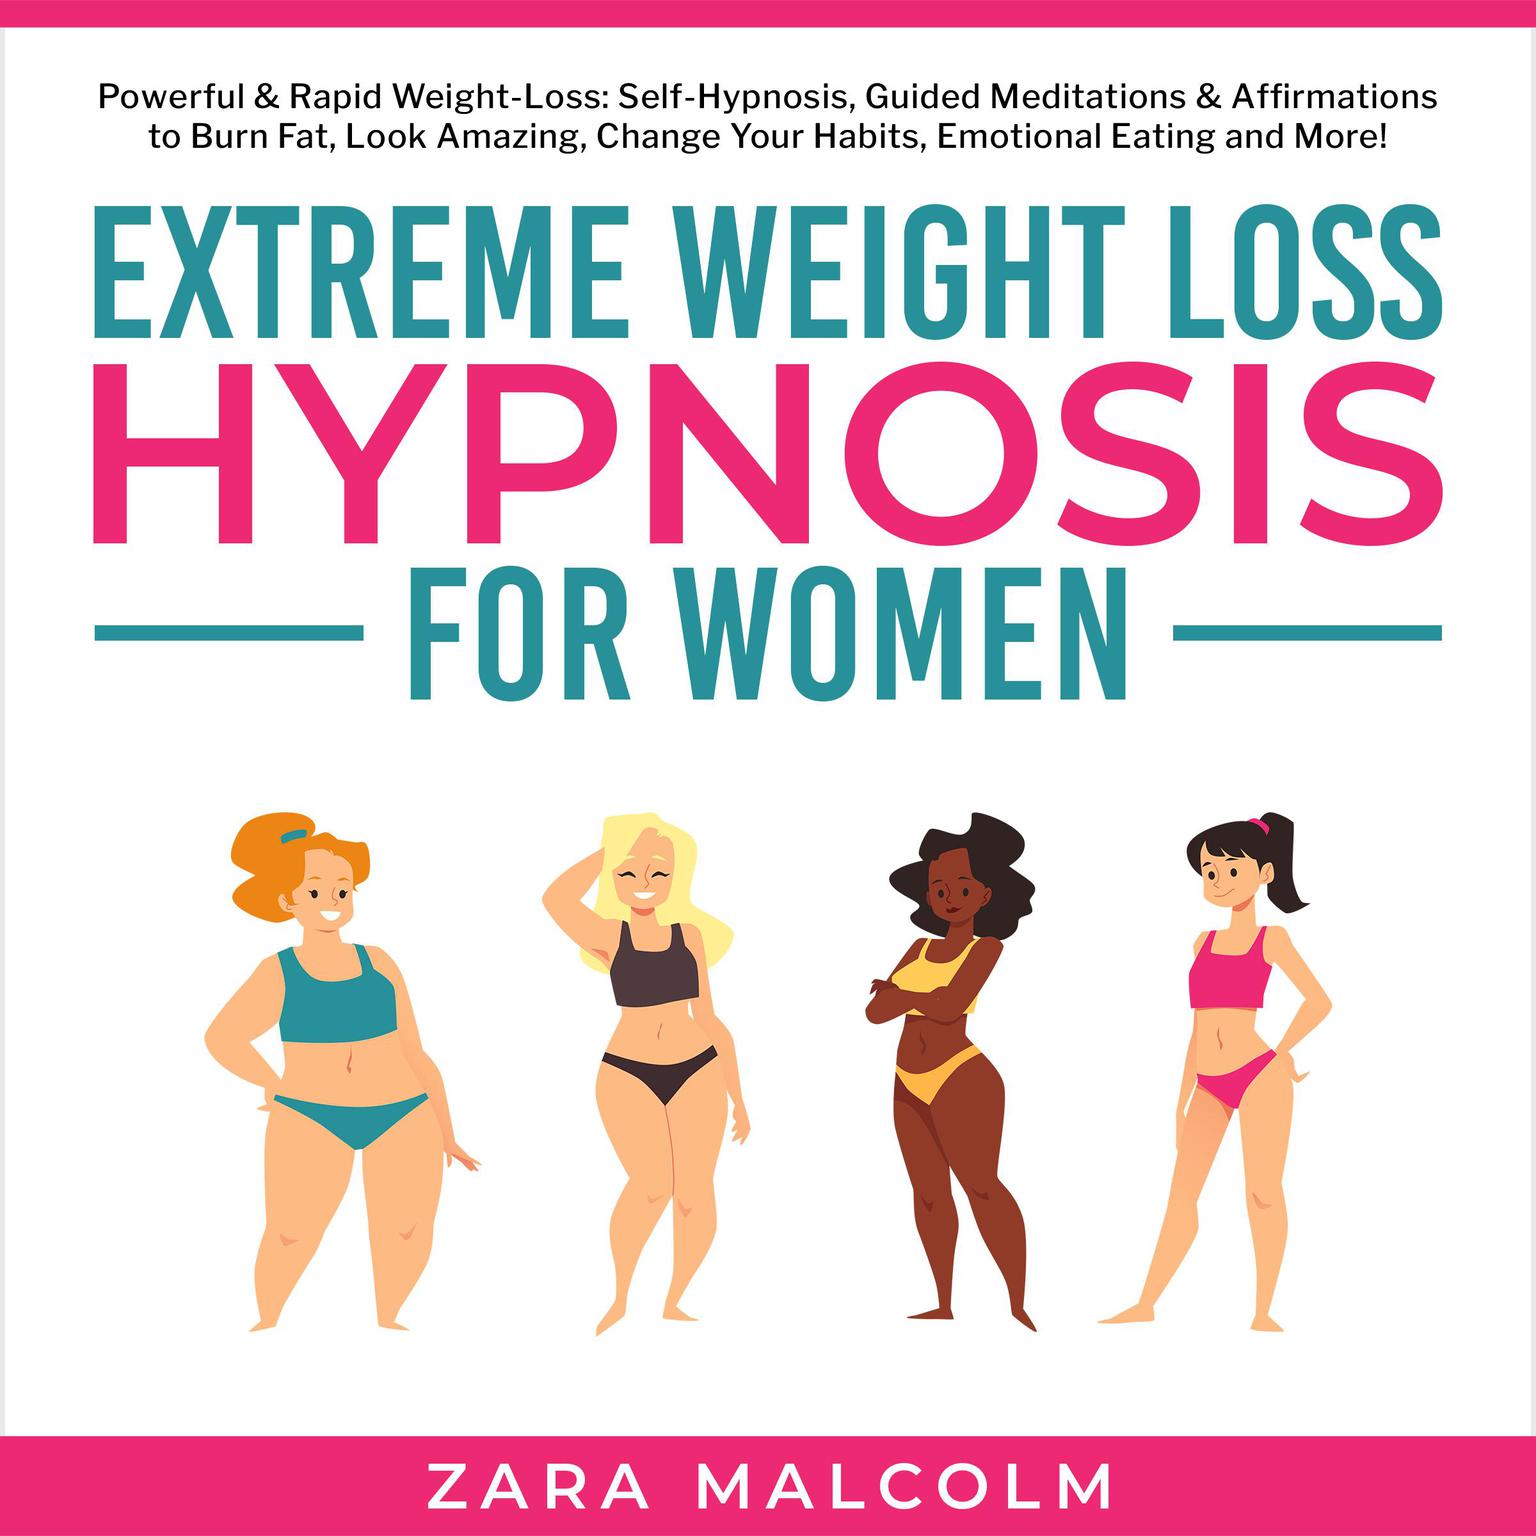 Extreme Weight Loss Hypnosis for Women: Powerful & Rapid Weight-Loss: Self-Hypnosis, Guided Meditations & Affirmations to Burn Fat, Look Amazing, Change Your Habits, Emotional Eating and More. Audiobook, by Zara Malcolm